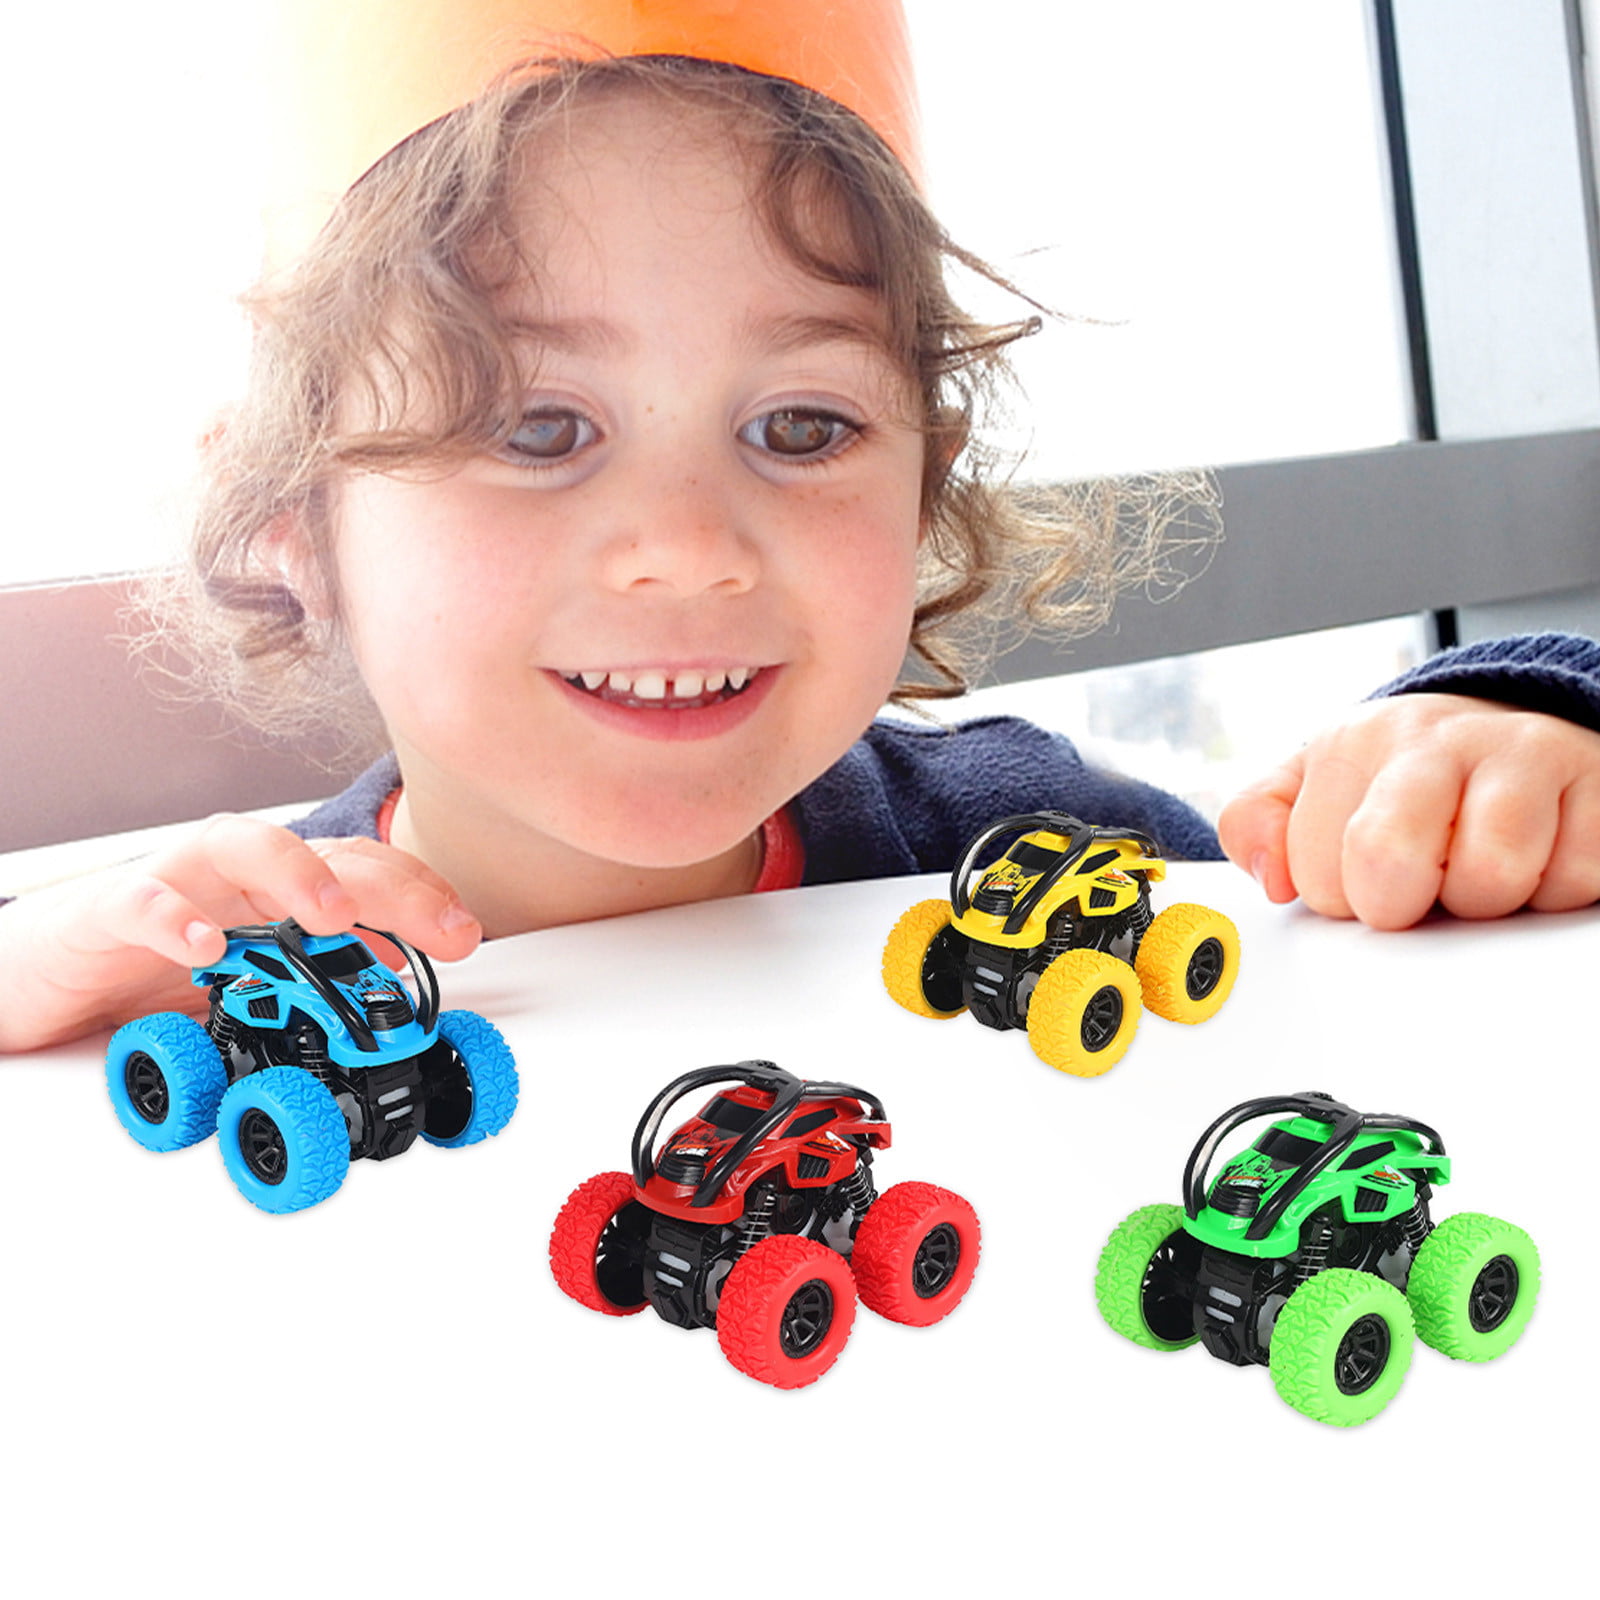 Toys 50% Off Clearance!Tarmeek Toddlers Toy Cars for Boys and Girls Age 3 4  5 6 7 Years Old,Children's Educational Mini Manual Inertial Construction  Vehicle Toy Birthday Gifts for Kids 